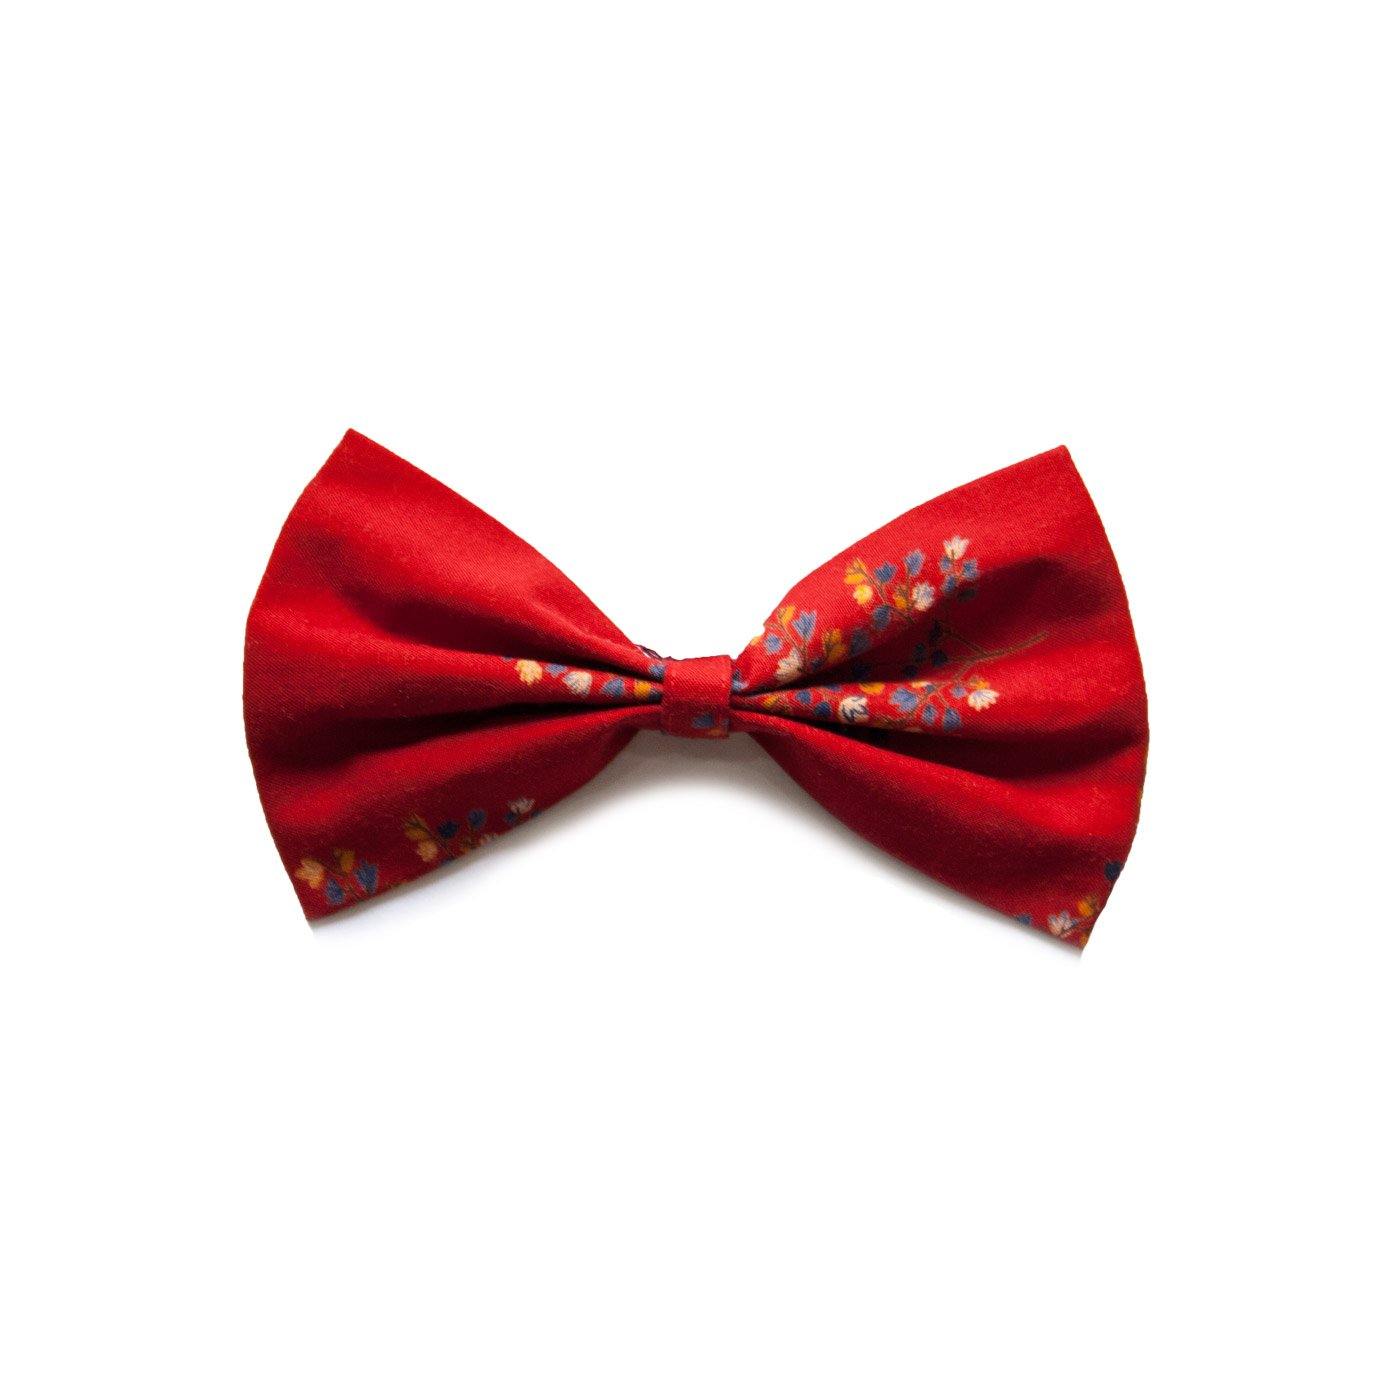 Ruse S-M / RED FLORAL "Red Floral Cotton Printed" Dog Bow Tie